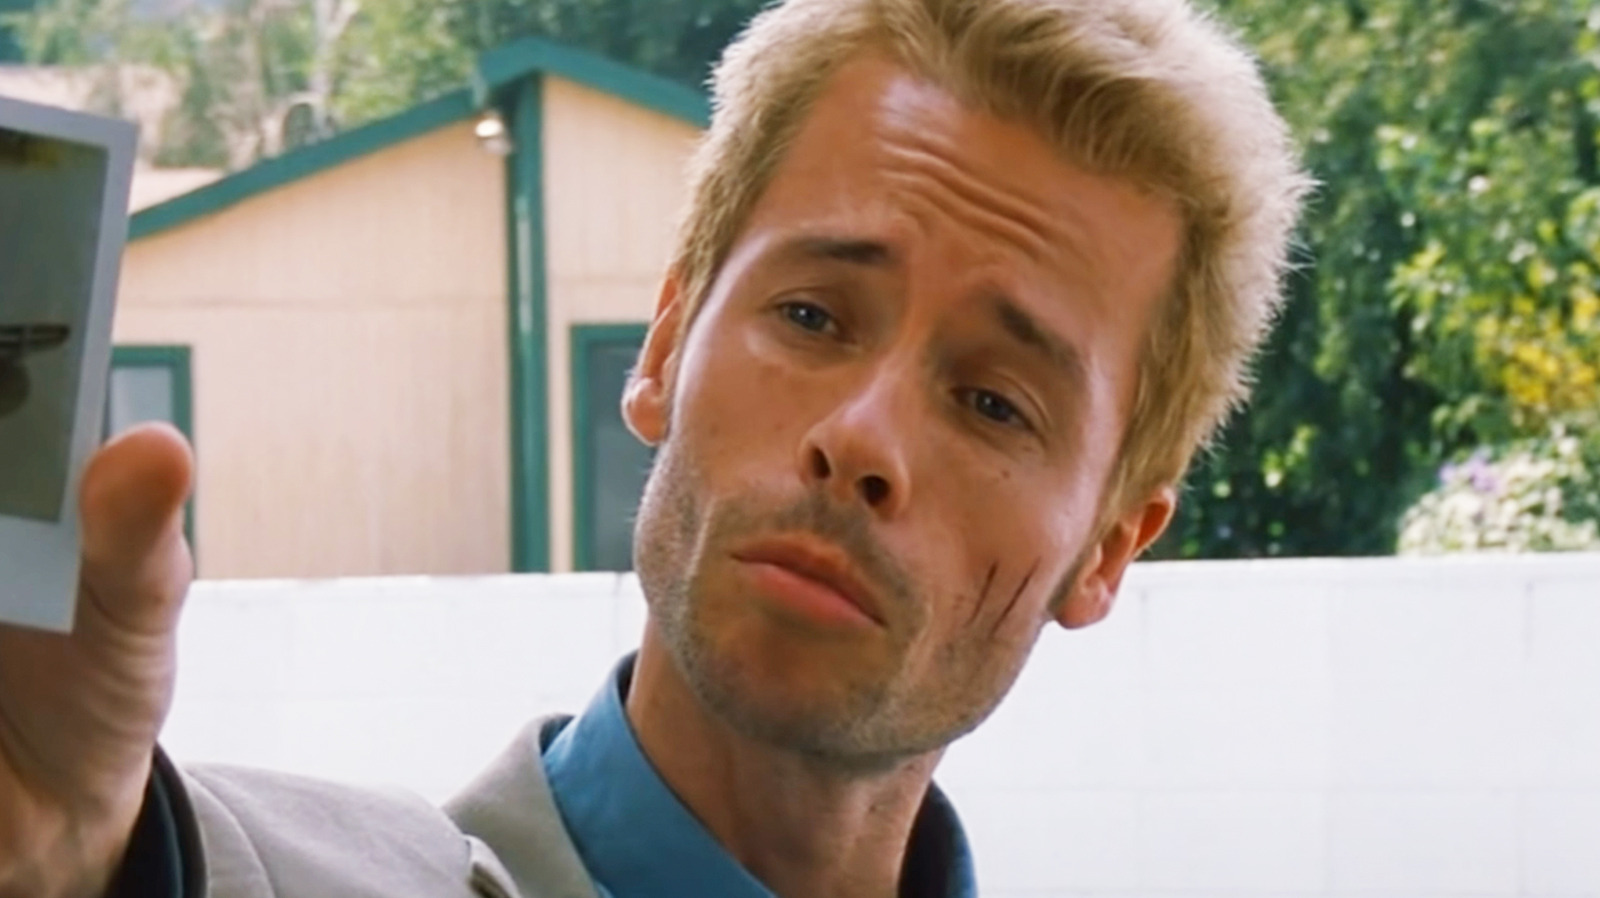   
																Christopher Nolan's Insomnia Was Never Meant To Be A 'Follow-Up' To Memento 
															 